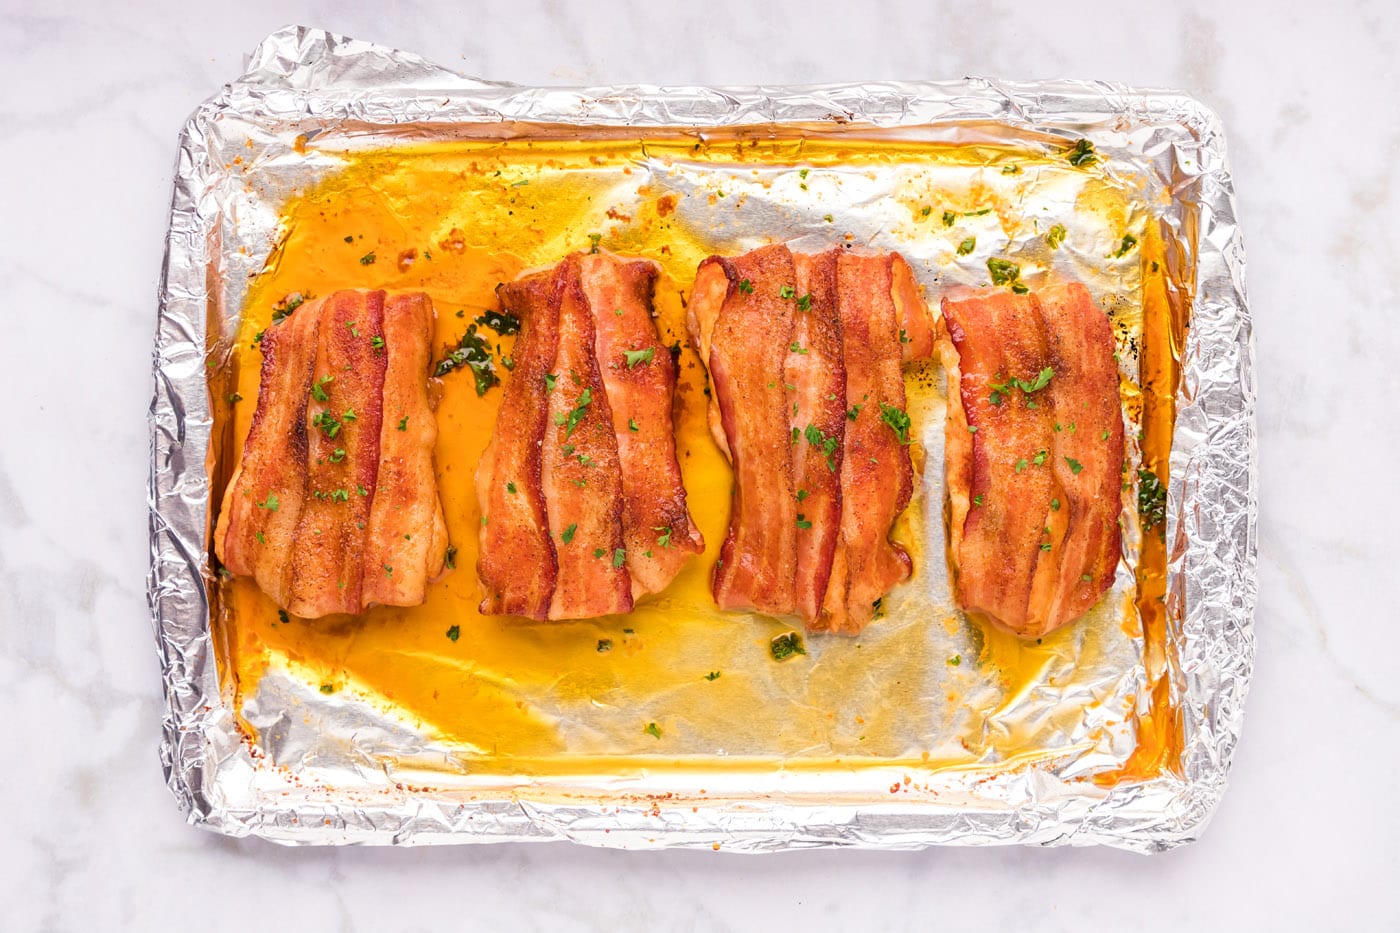 finished bacon wrapped chicken on a baking sheet